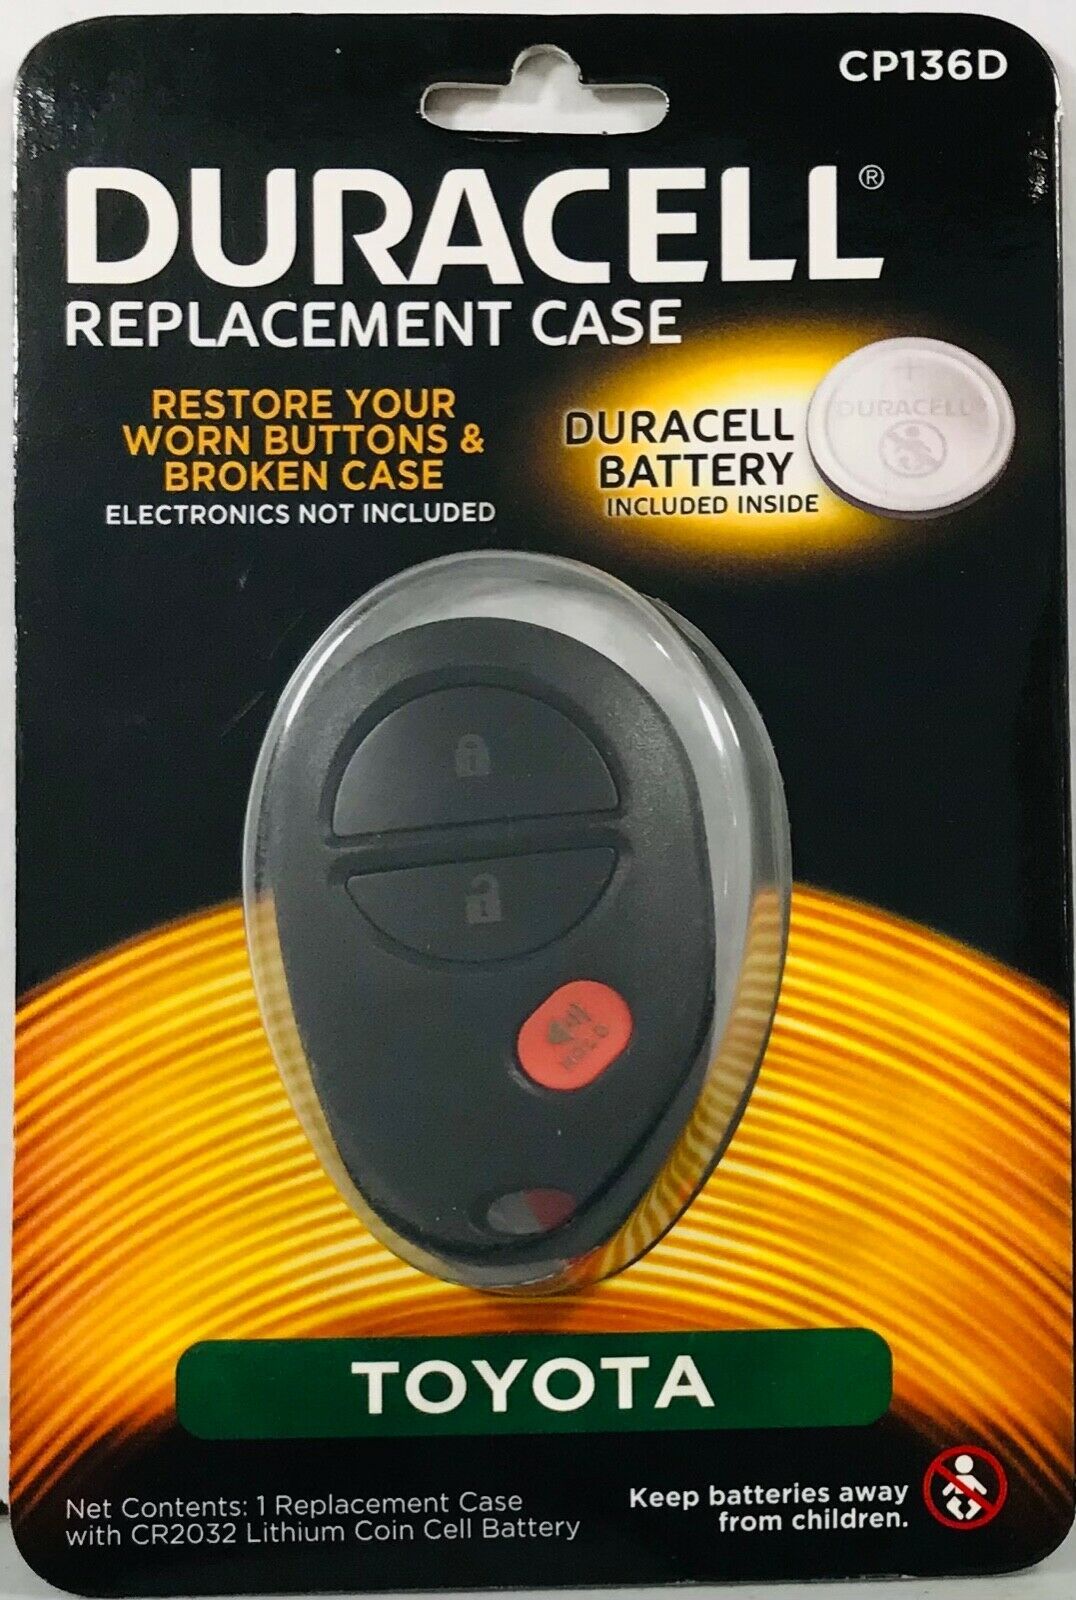 Toyota Duracell Replacement Case CP136D Restore Your Worn Buttons & Broken Case - $15.95